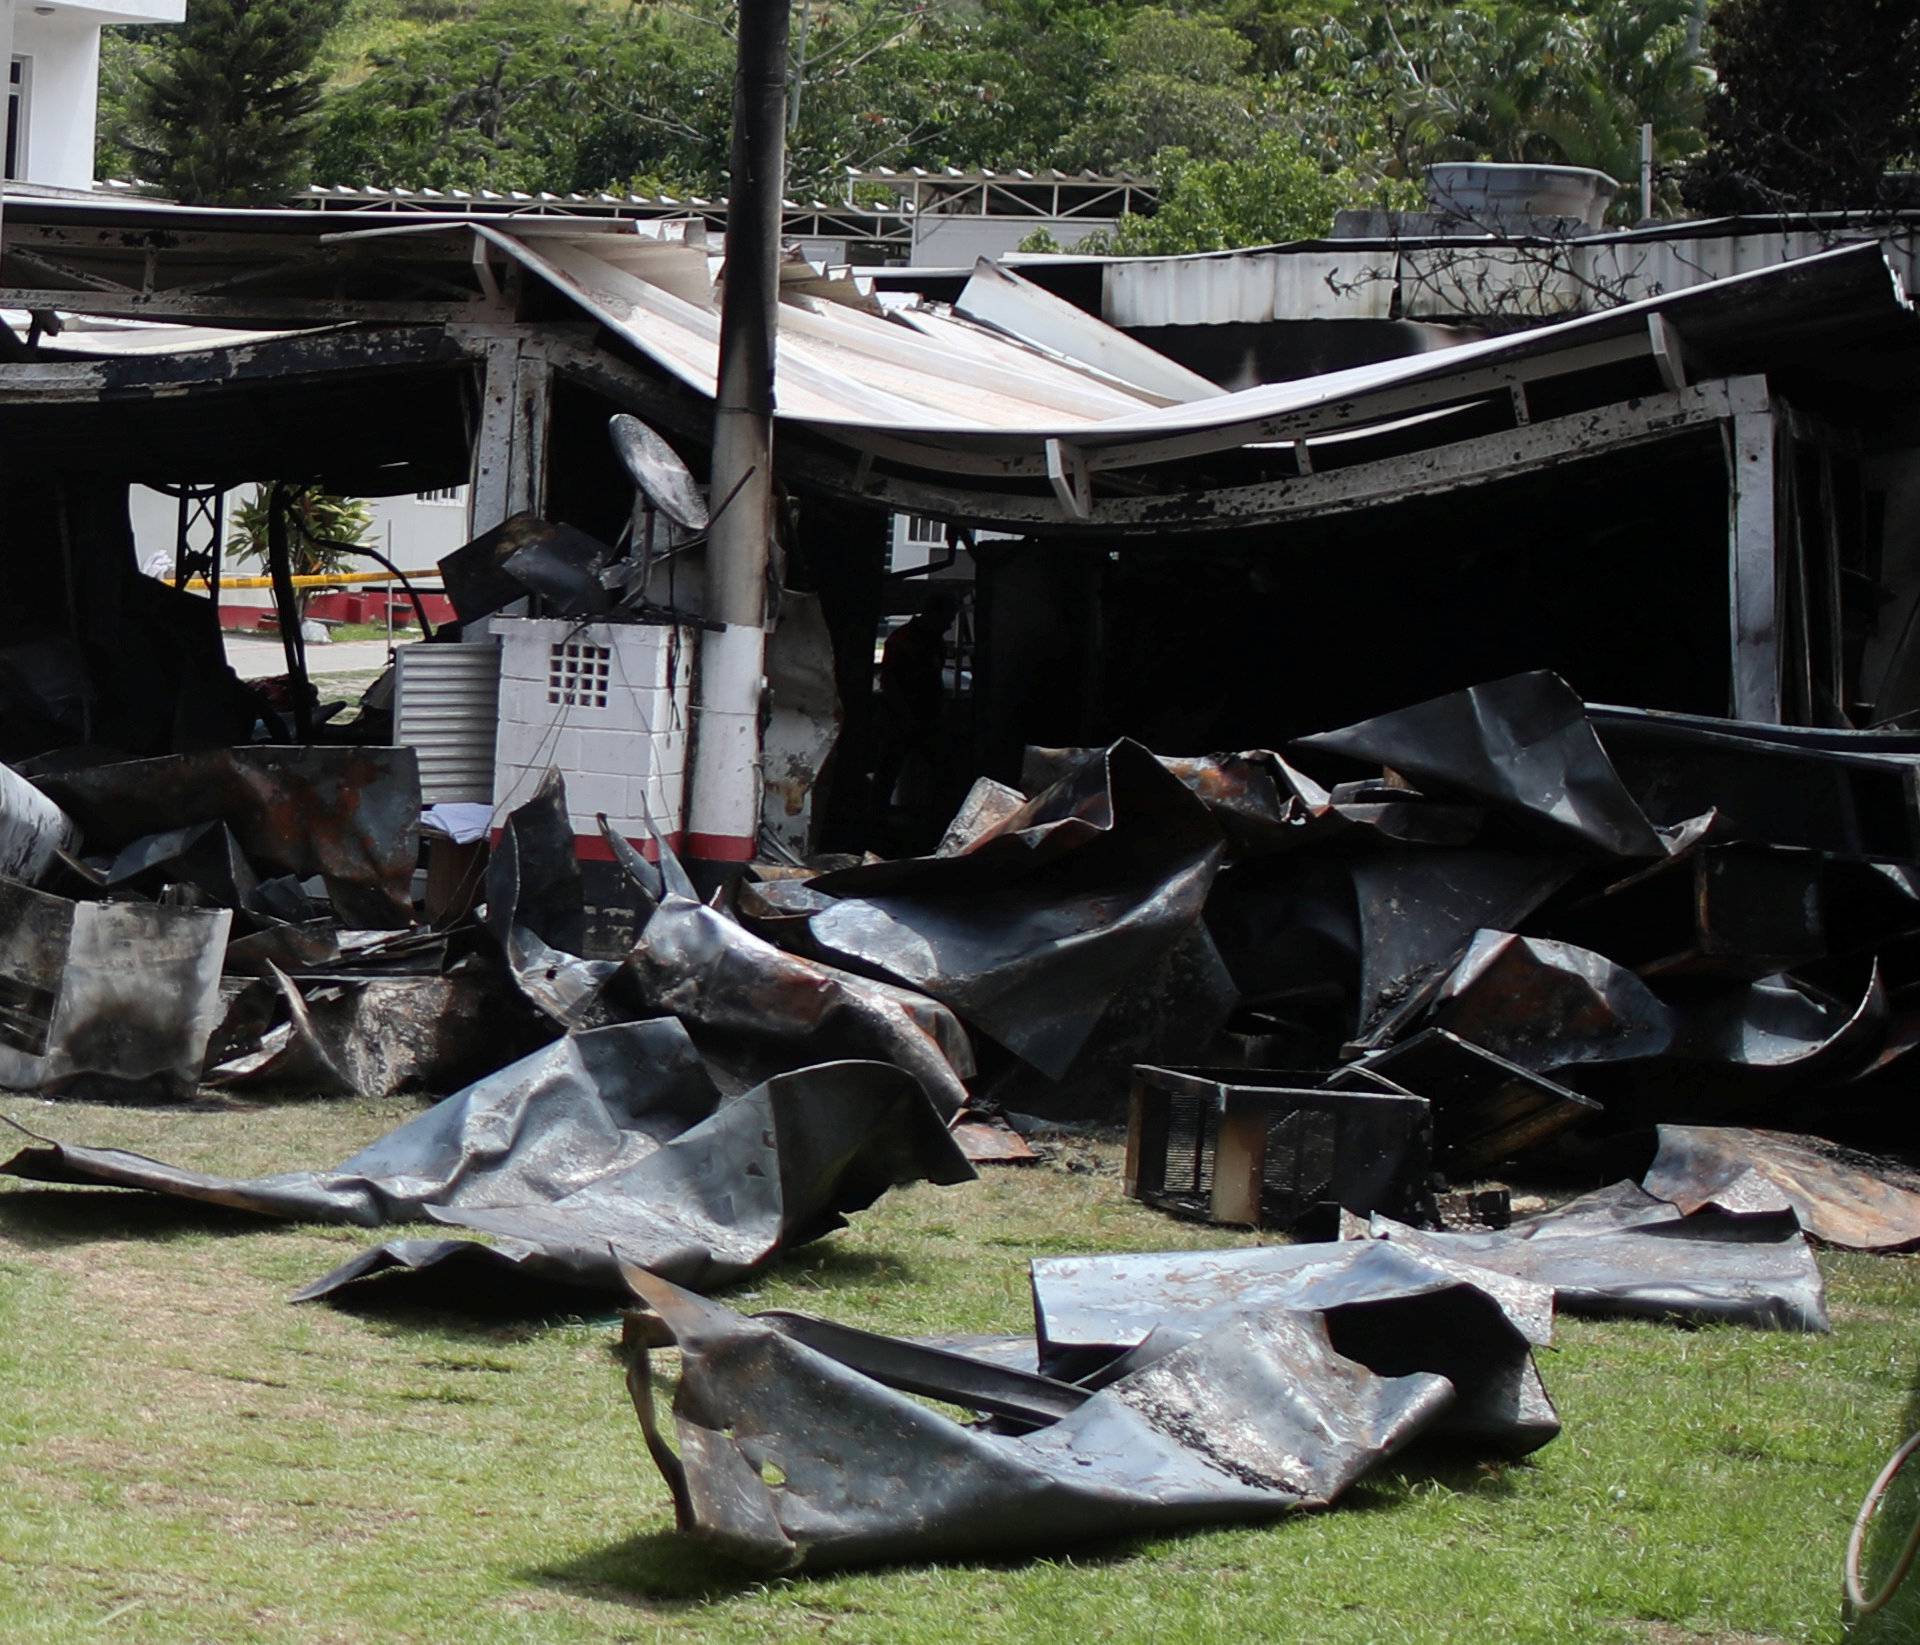 A destroyed area of the Flamengo soccer club's training center is pictured after a deadly fire, in Rio de Janeiro